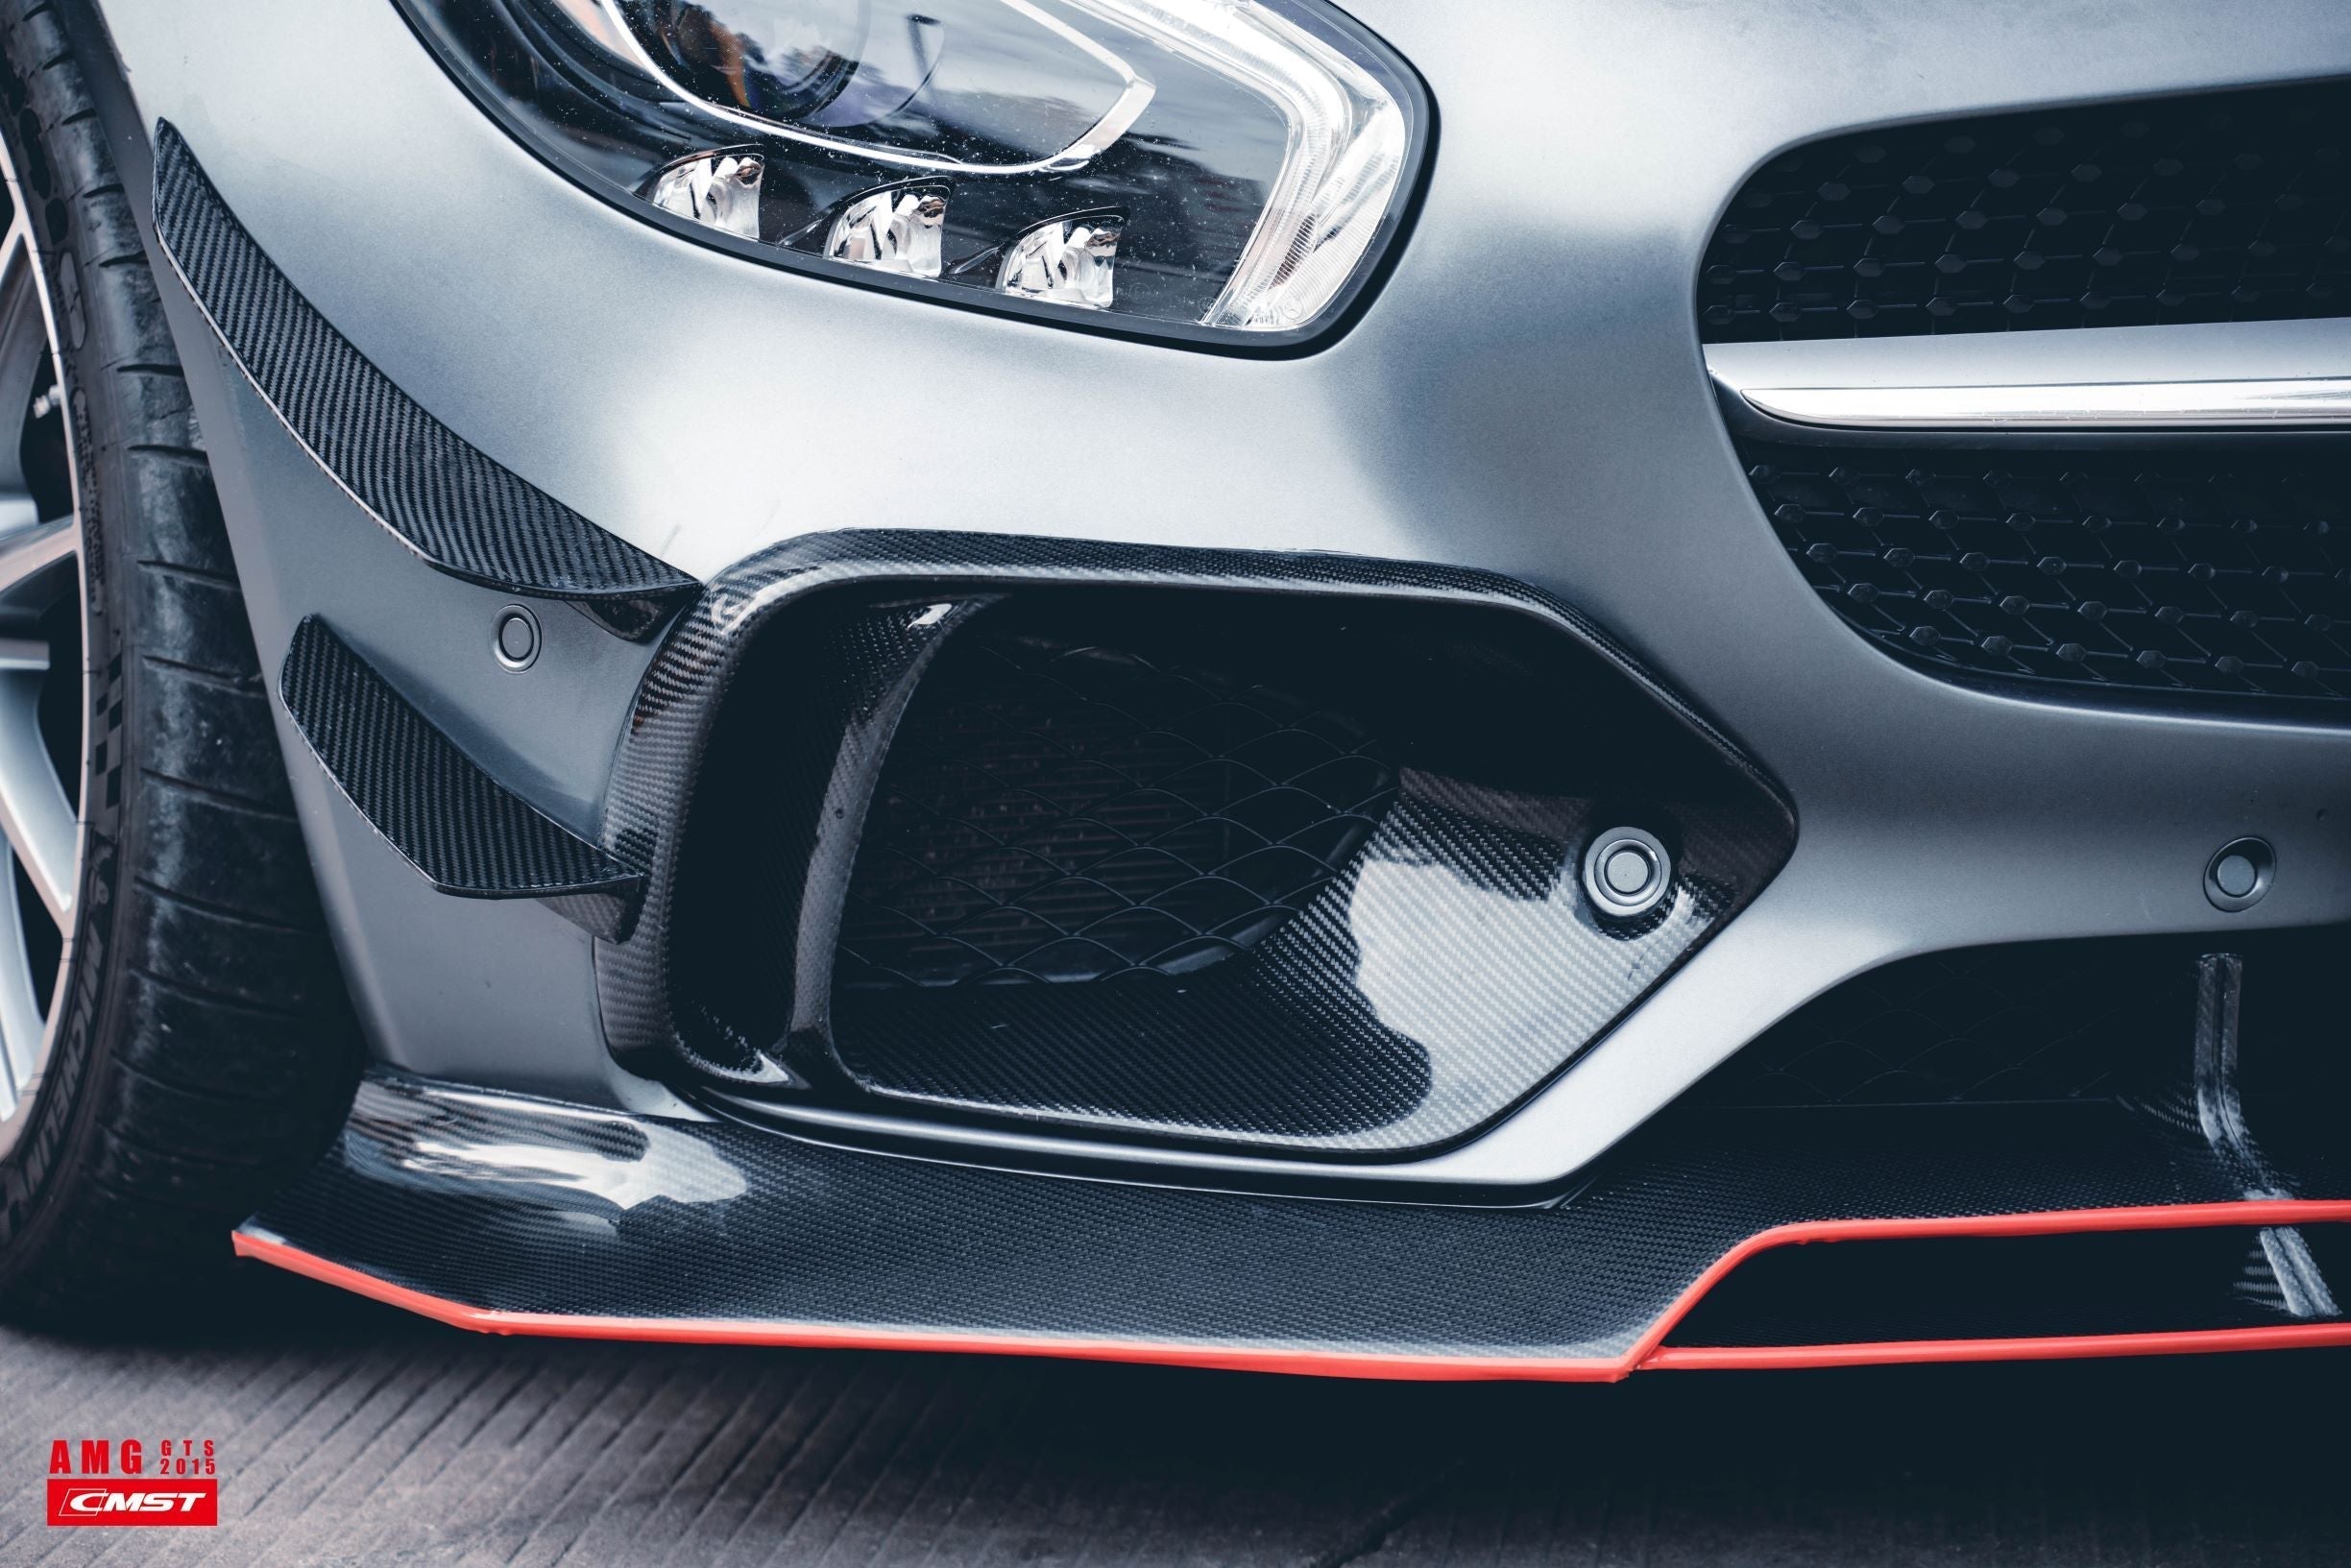 CMST Tuning Carbon Fiber Front Intake Vent Trim Cover for Mercedes Benz C190 AMG GT GTS 2015-2017-9